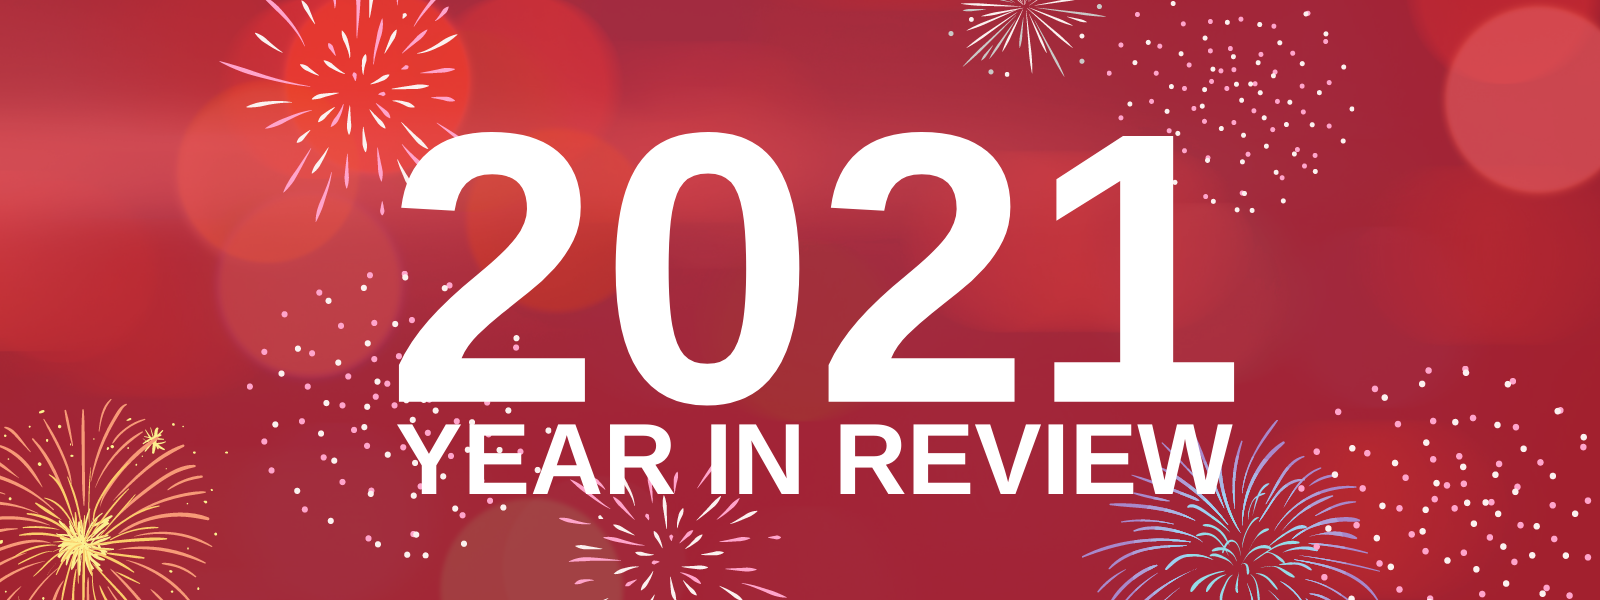 Cloze Year in Review 2021